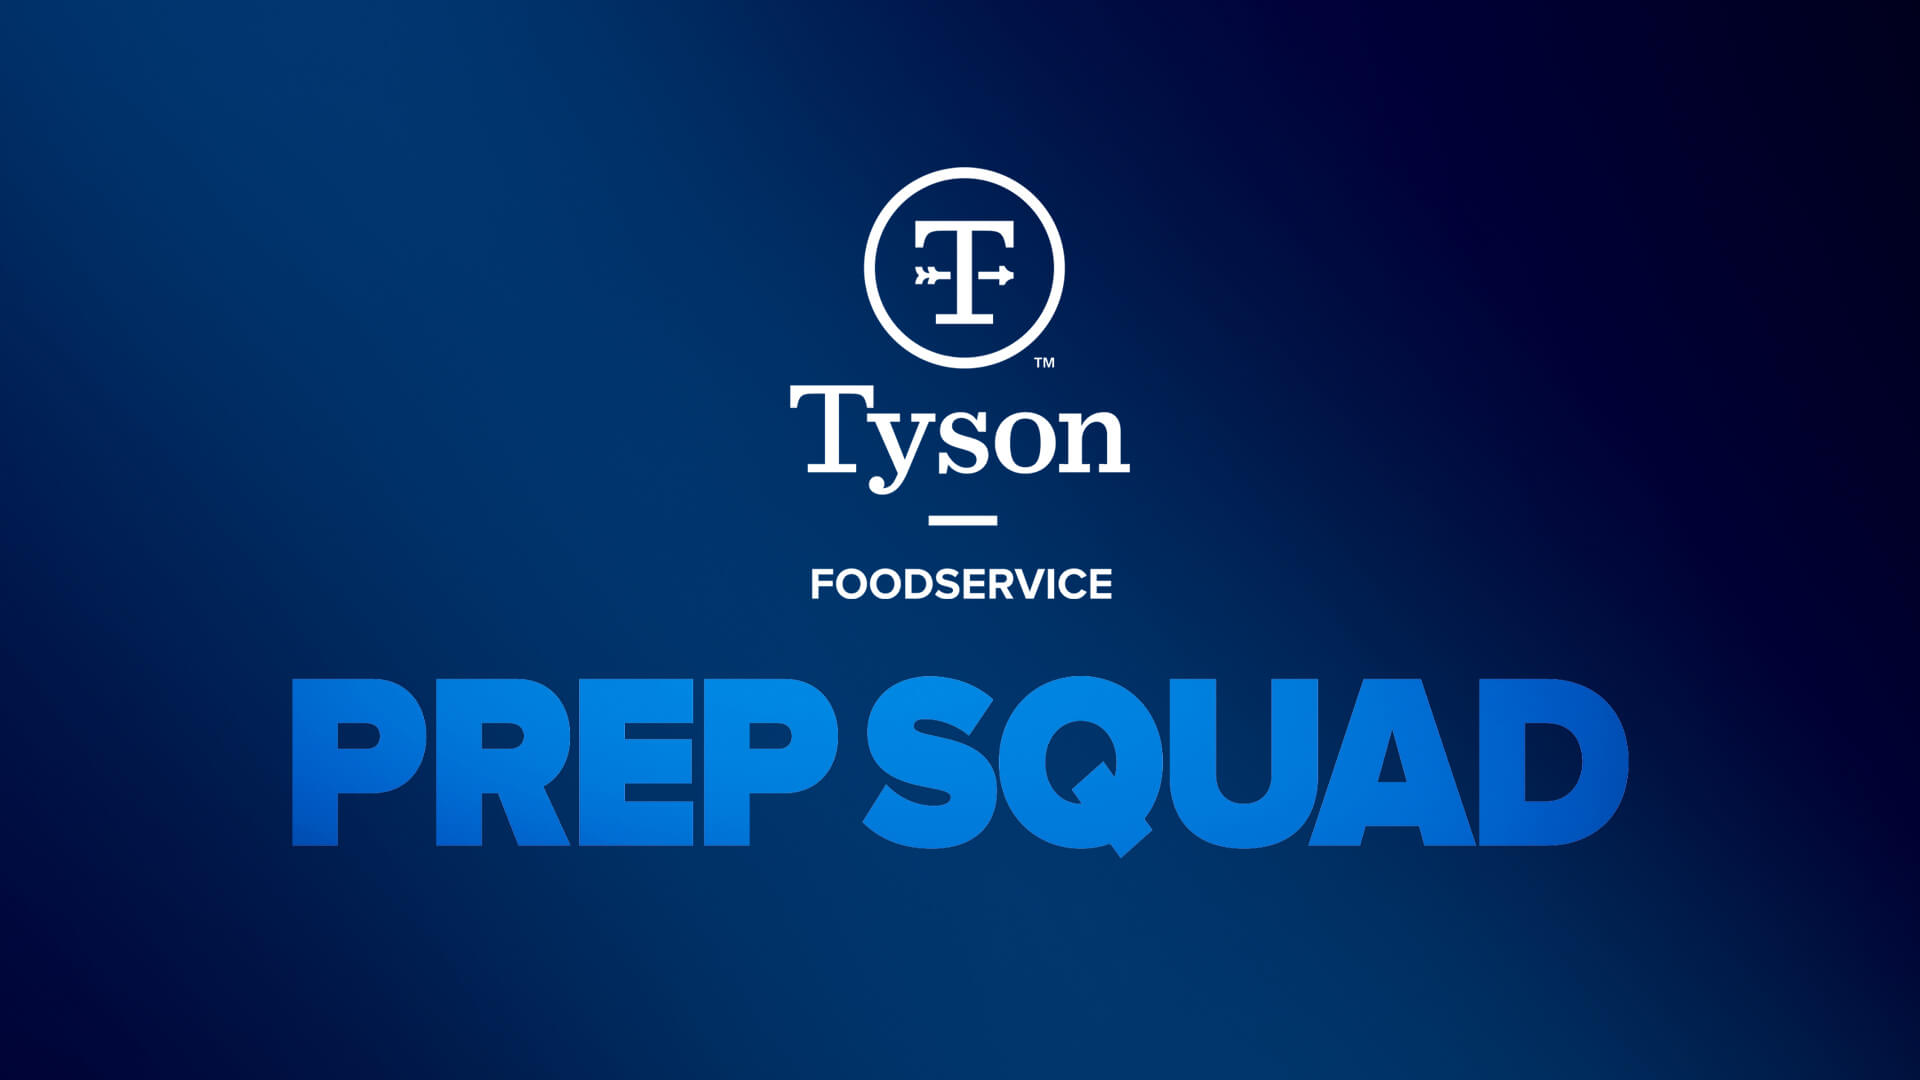 Tyson foodservice logo and tex that reads, "prep squad" on a blue background.